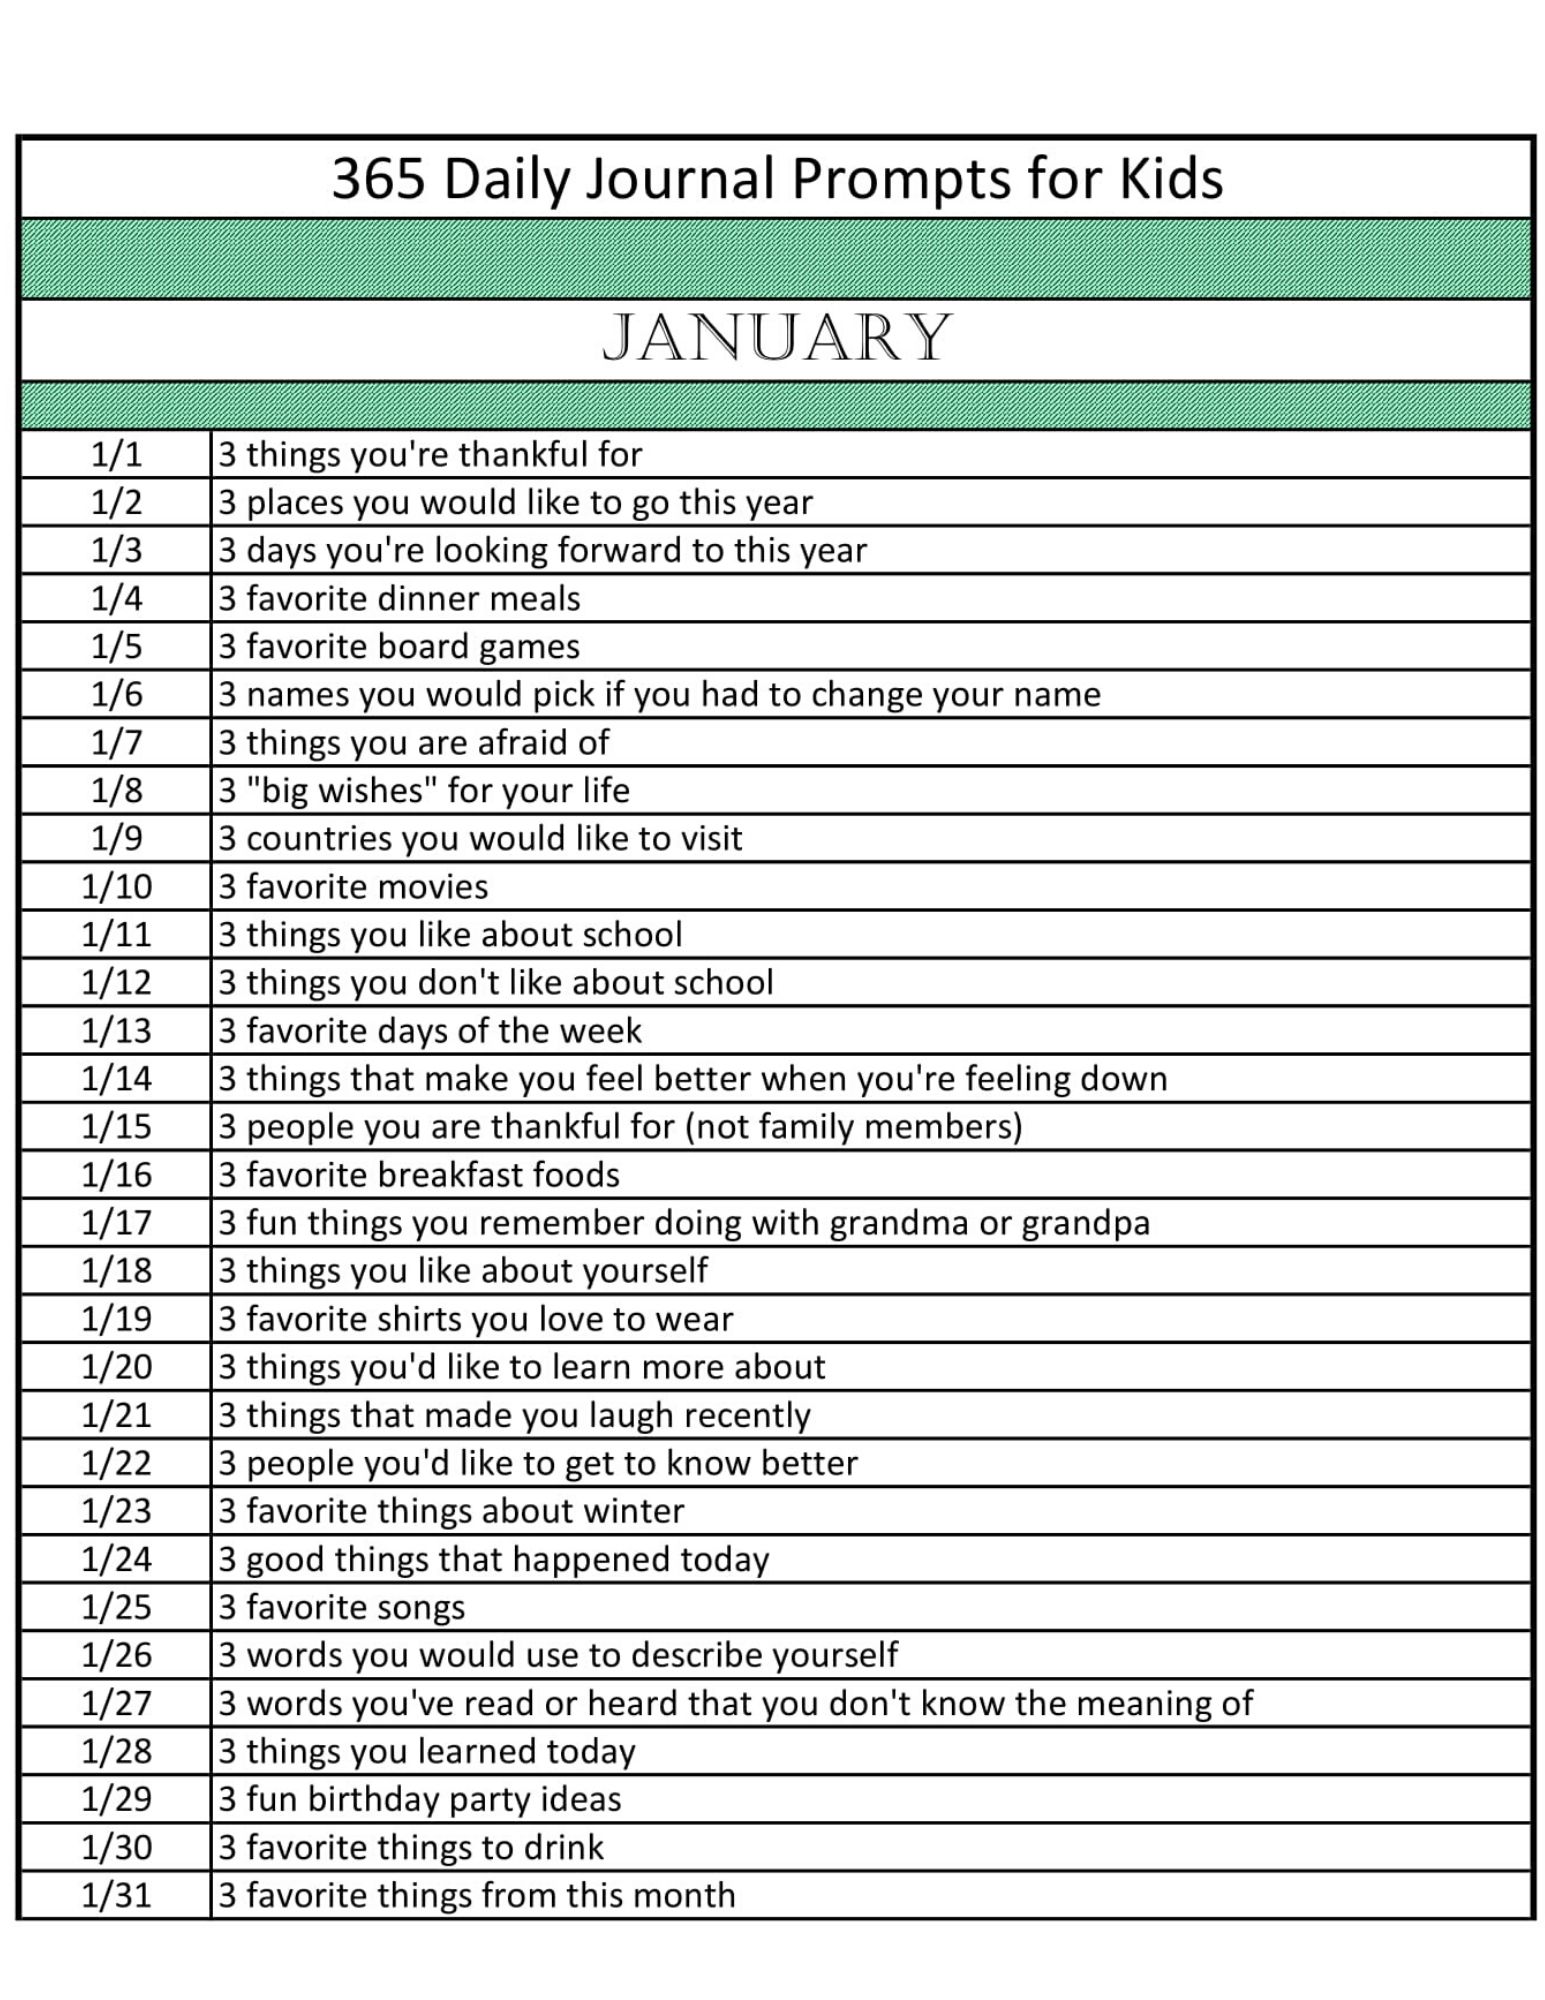 365 daily journal prompts for kids